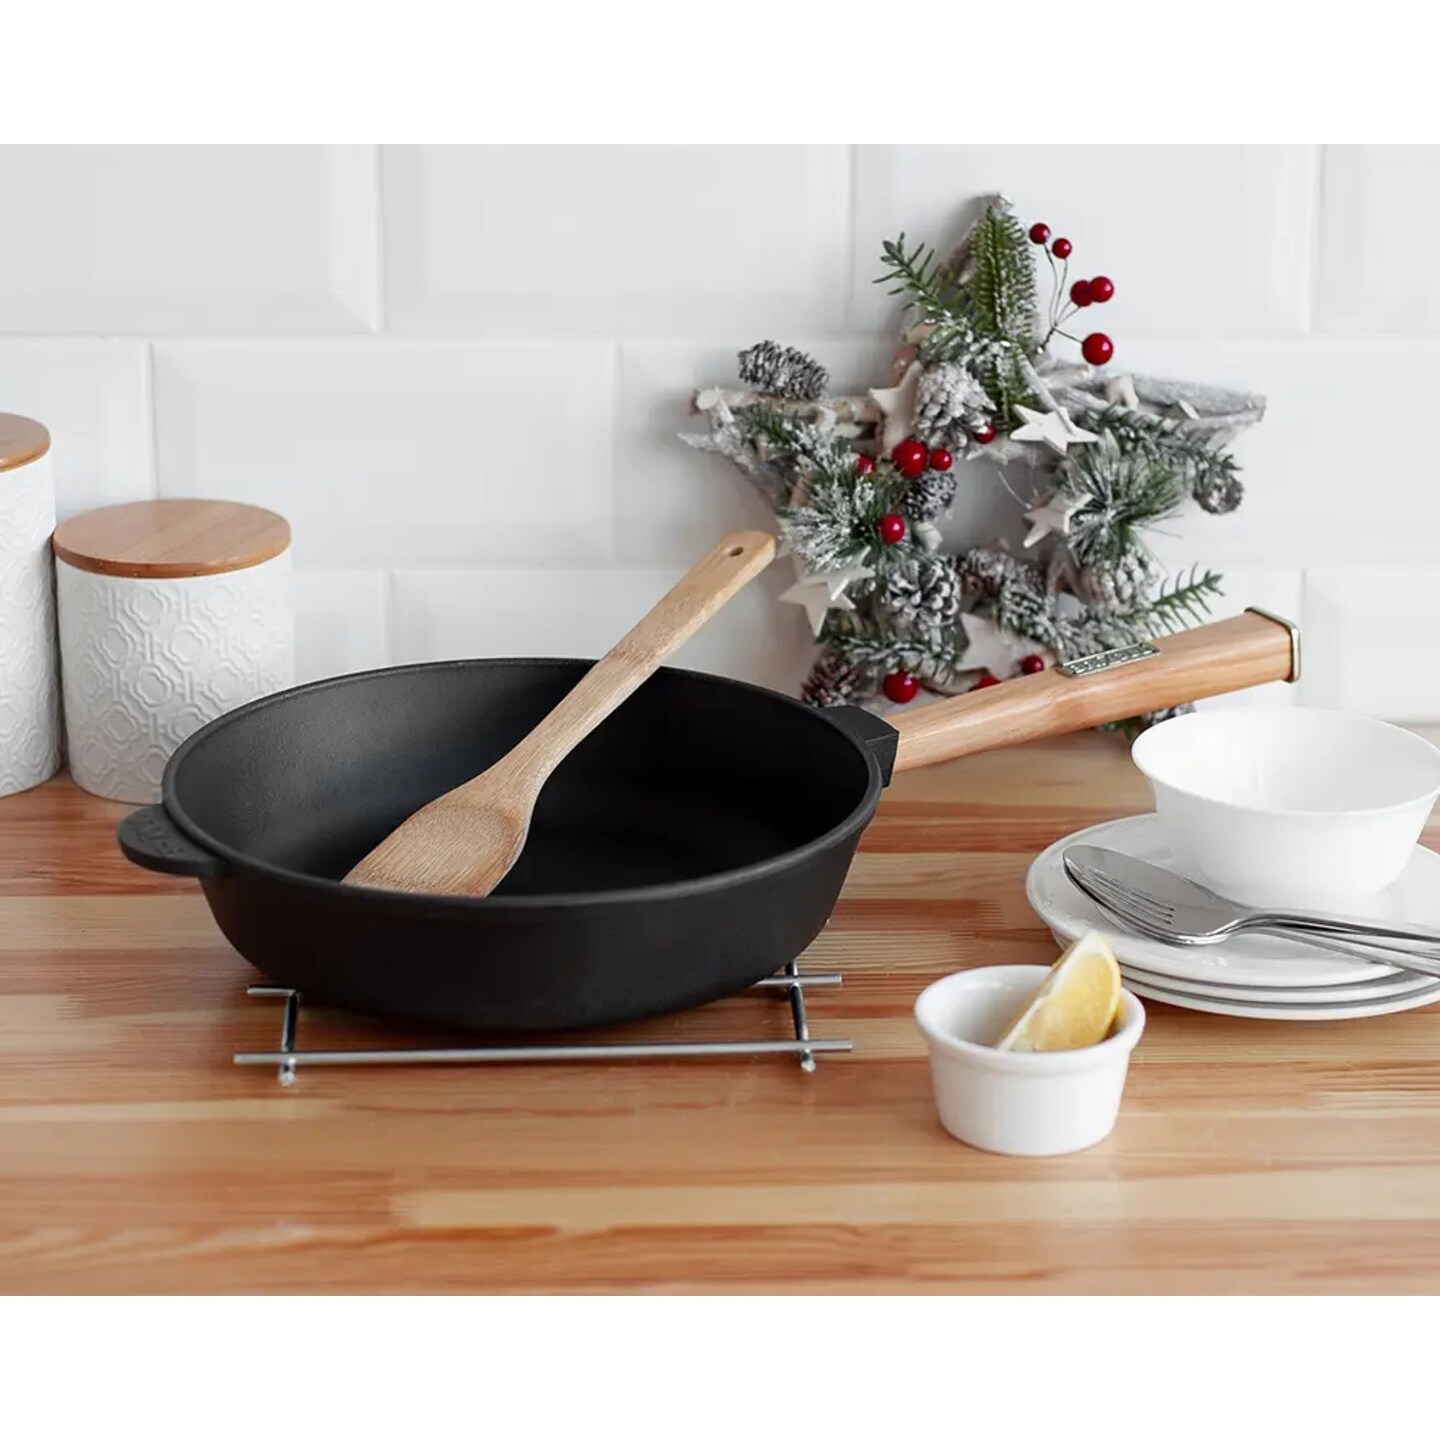 Brizoll Cast Iron Deep Frying Pan w/ Removable Handle - On Sale - Bed Bath  & Beyond - 36841422